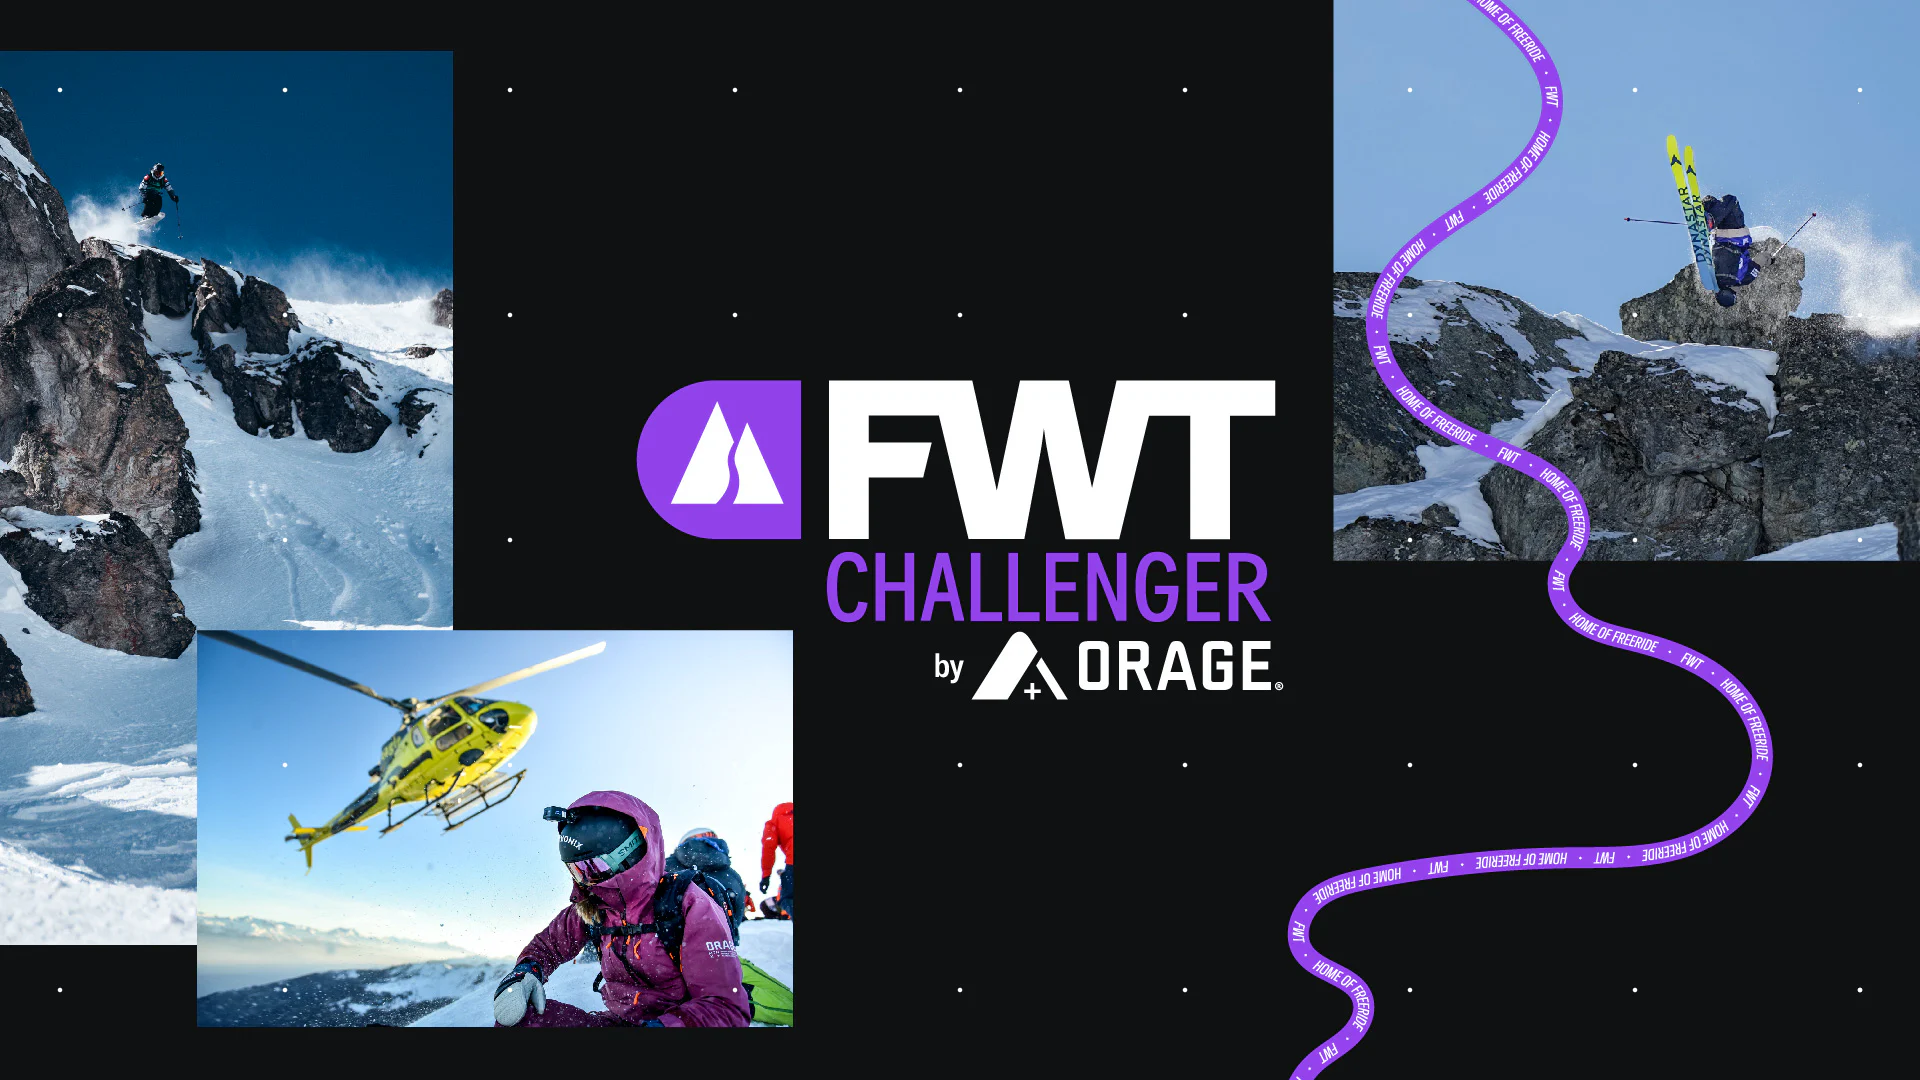 X OVER RIDE 24 becomes a FWT Challenger 4*